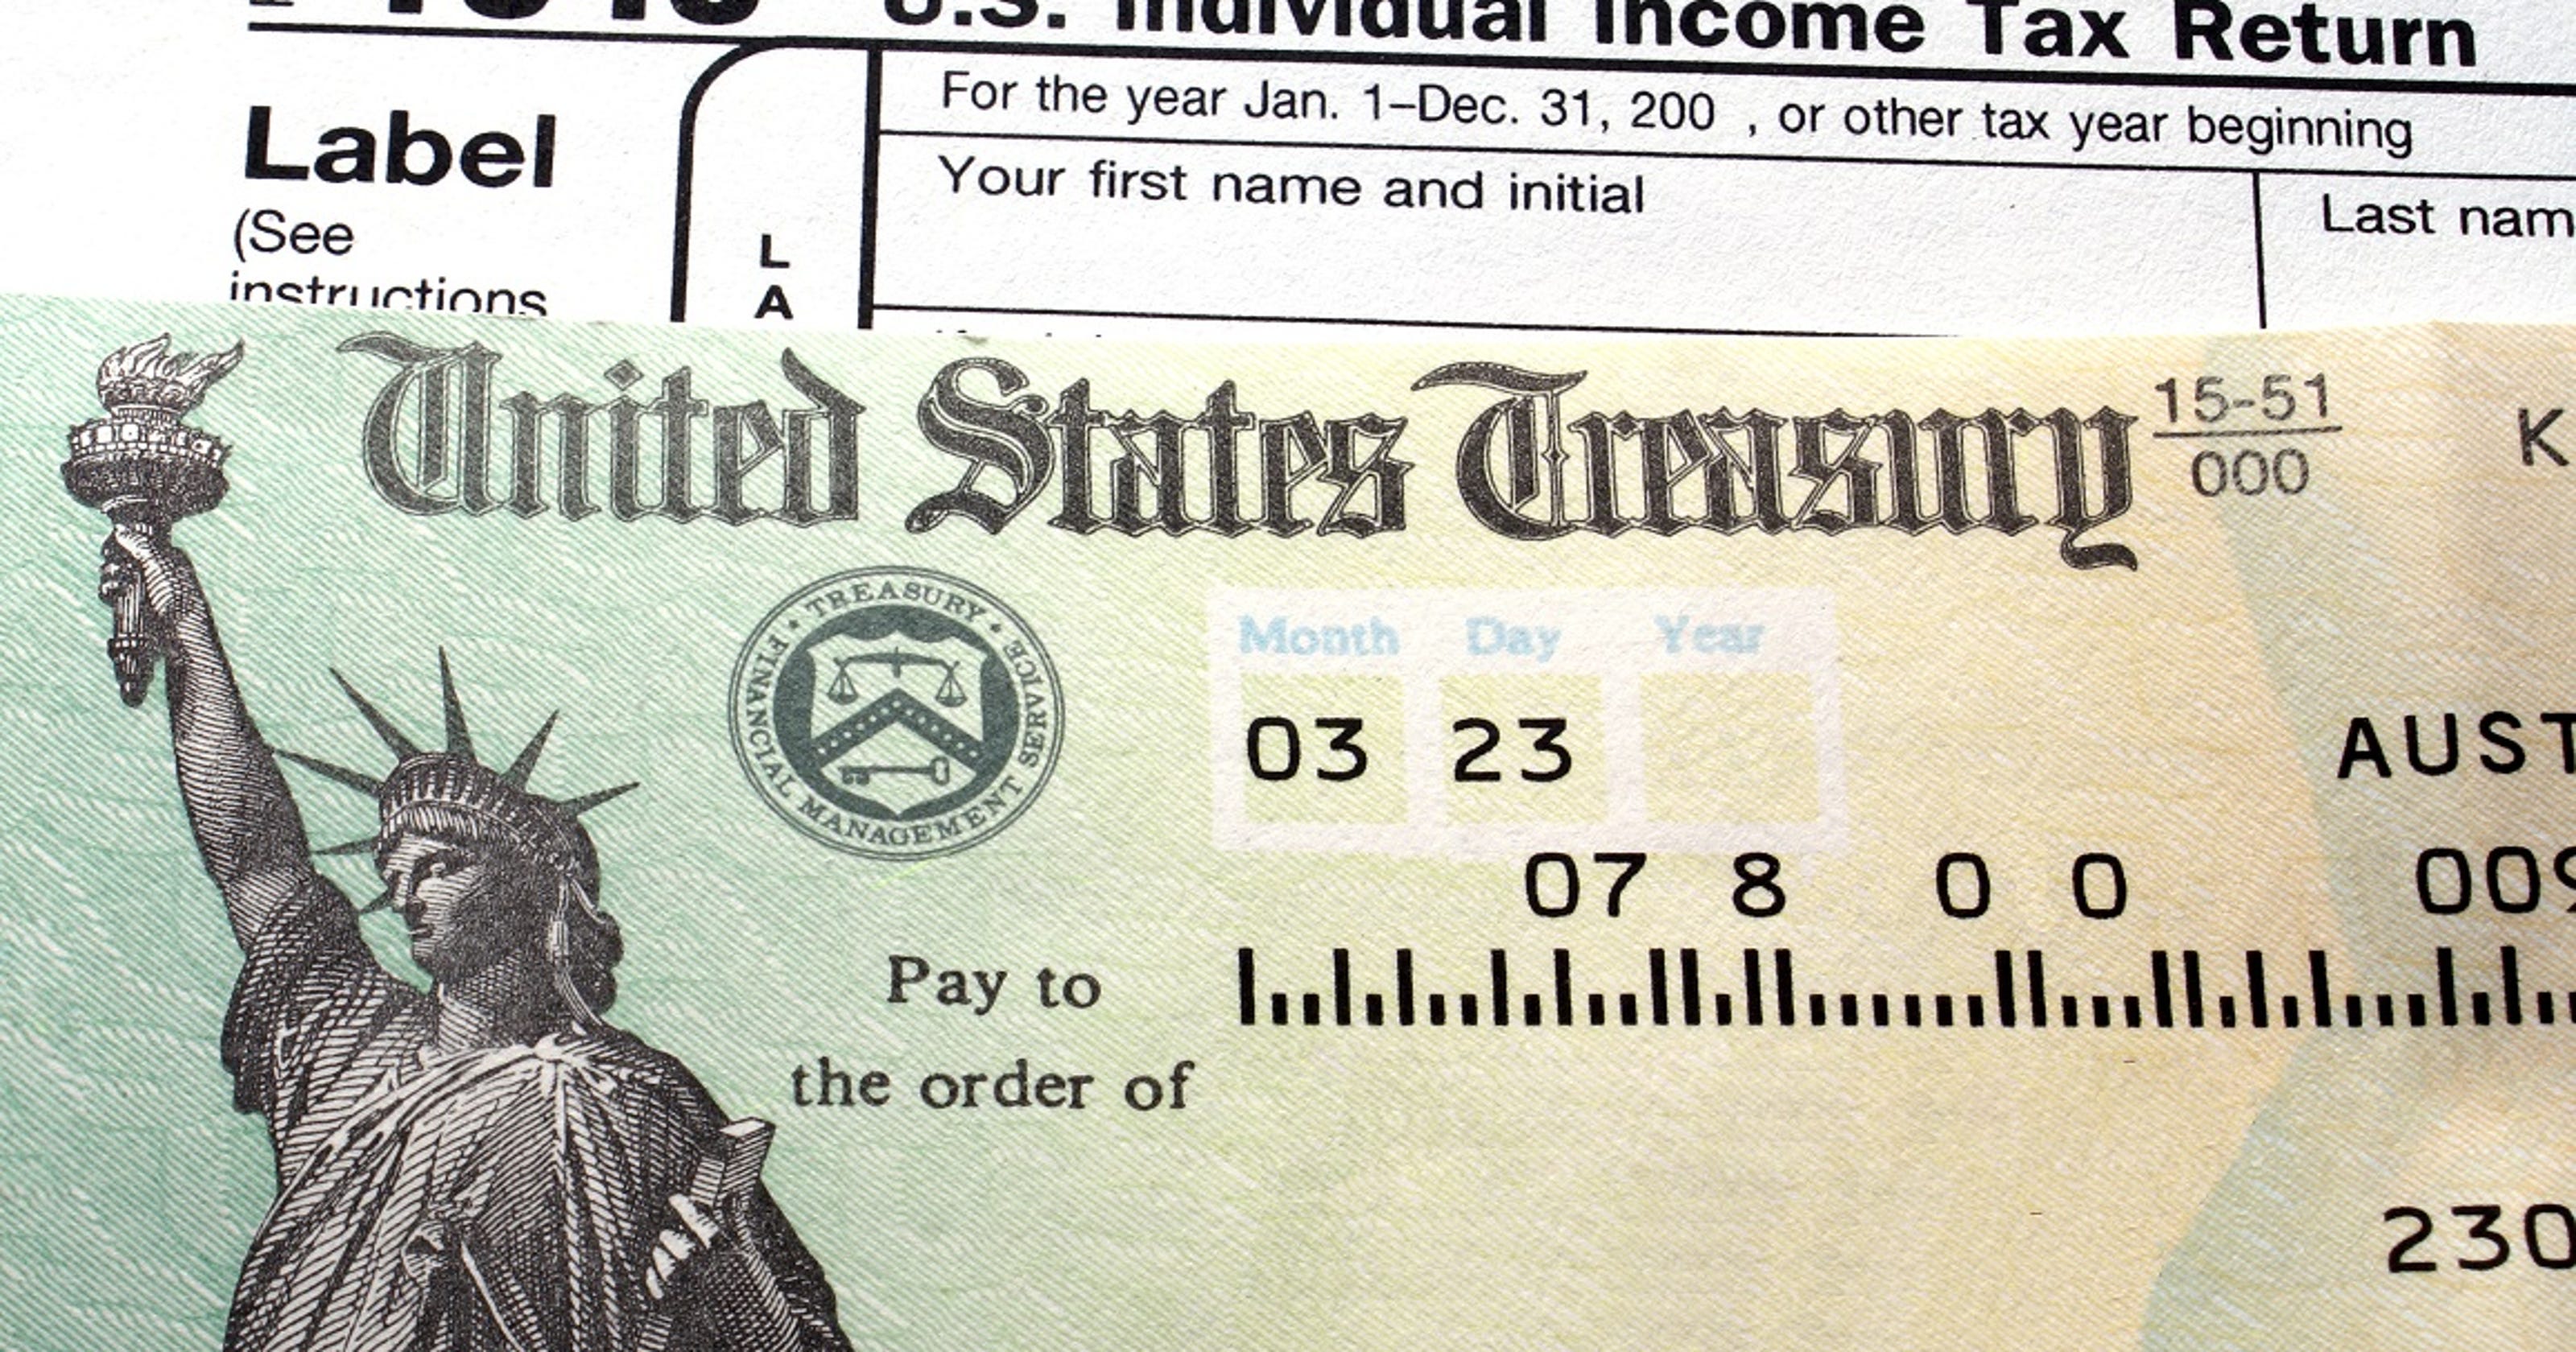 tax-refund-2019-unexpected-irs-bills-burden-some-americans-budgets